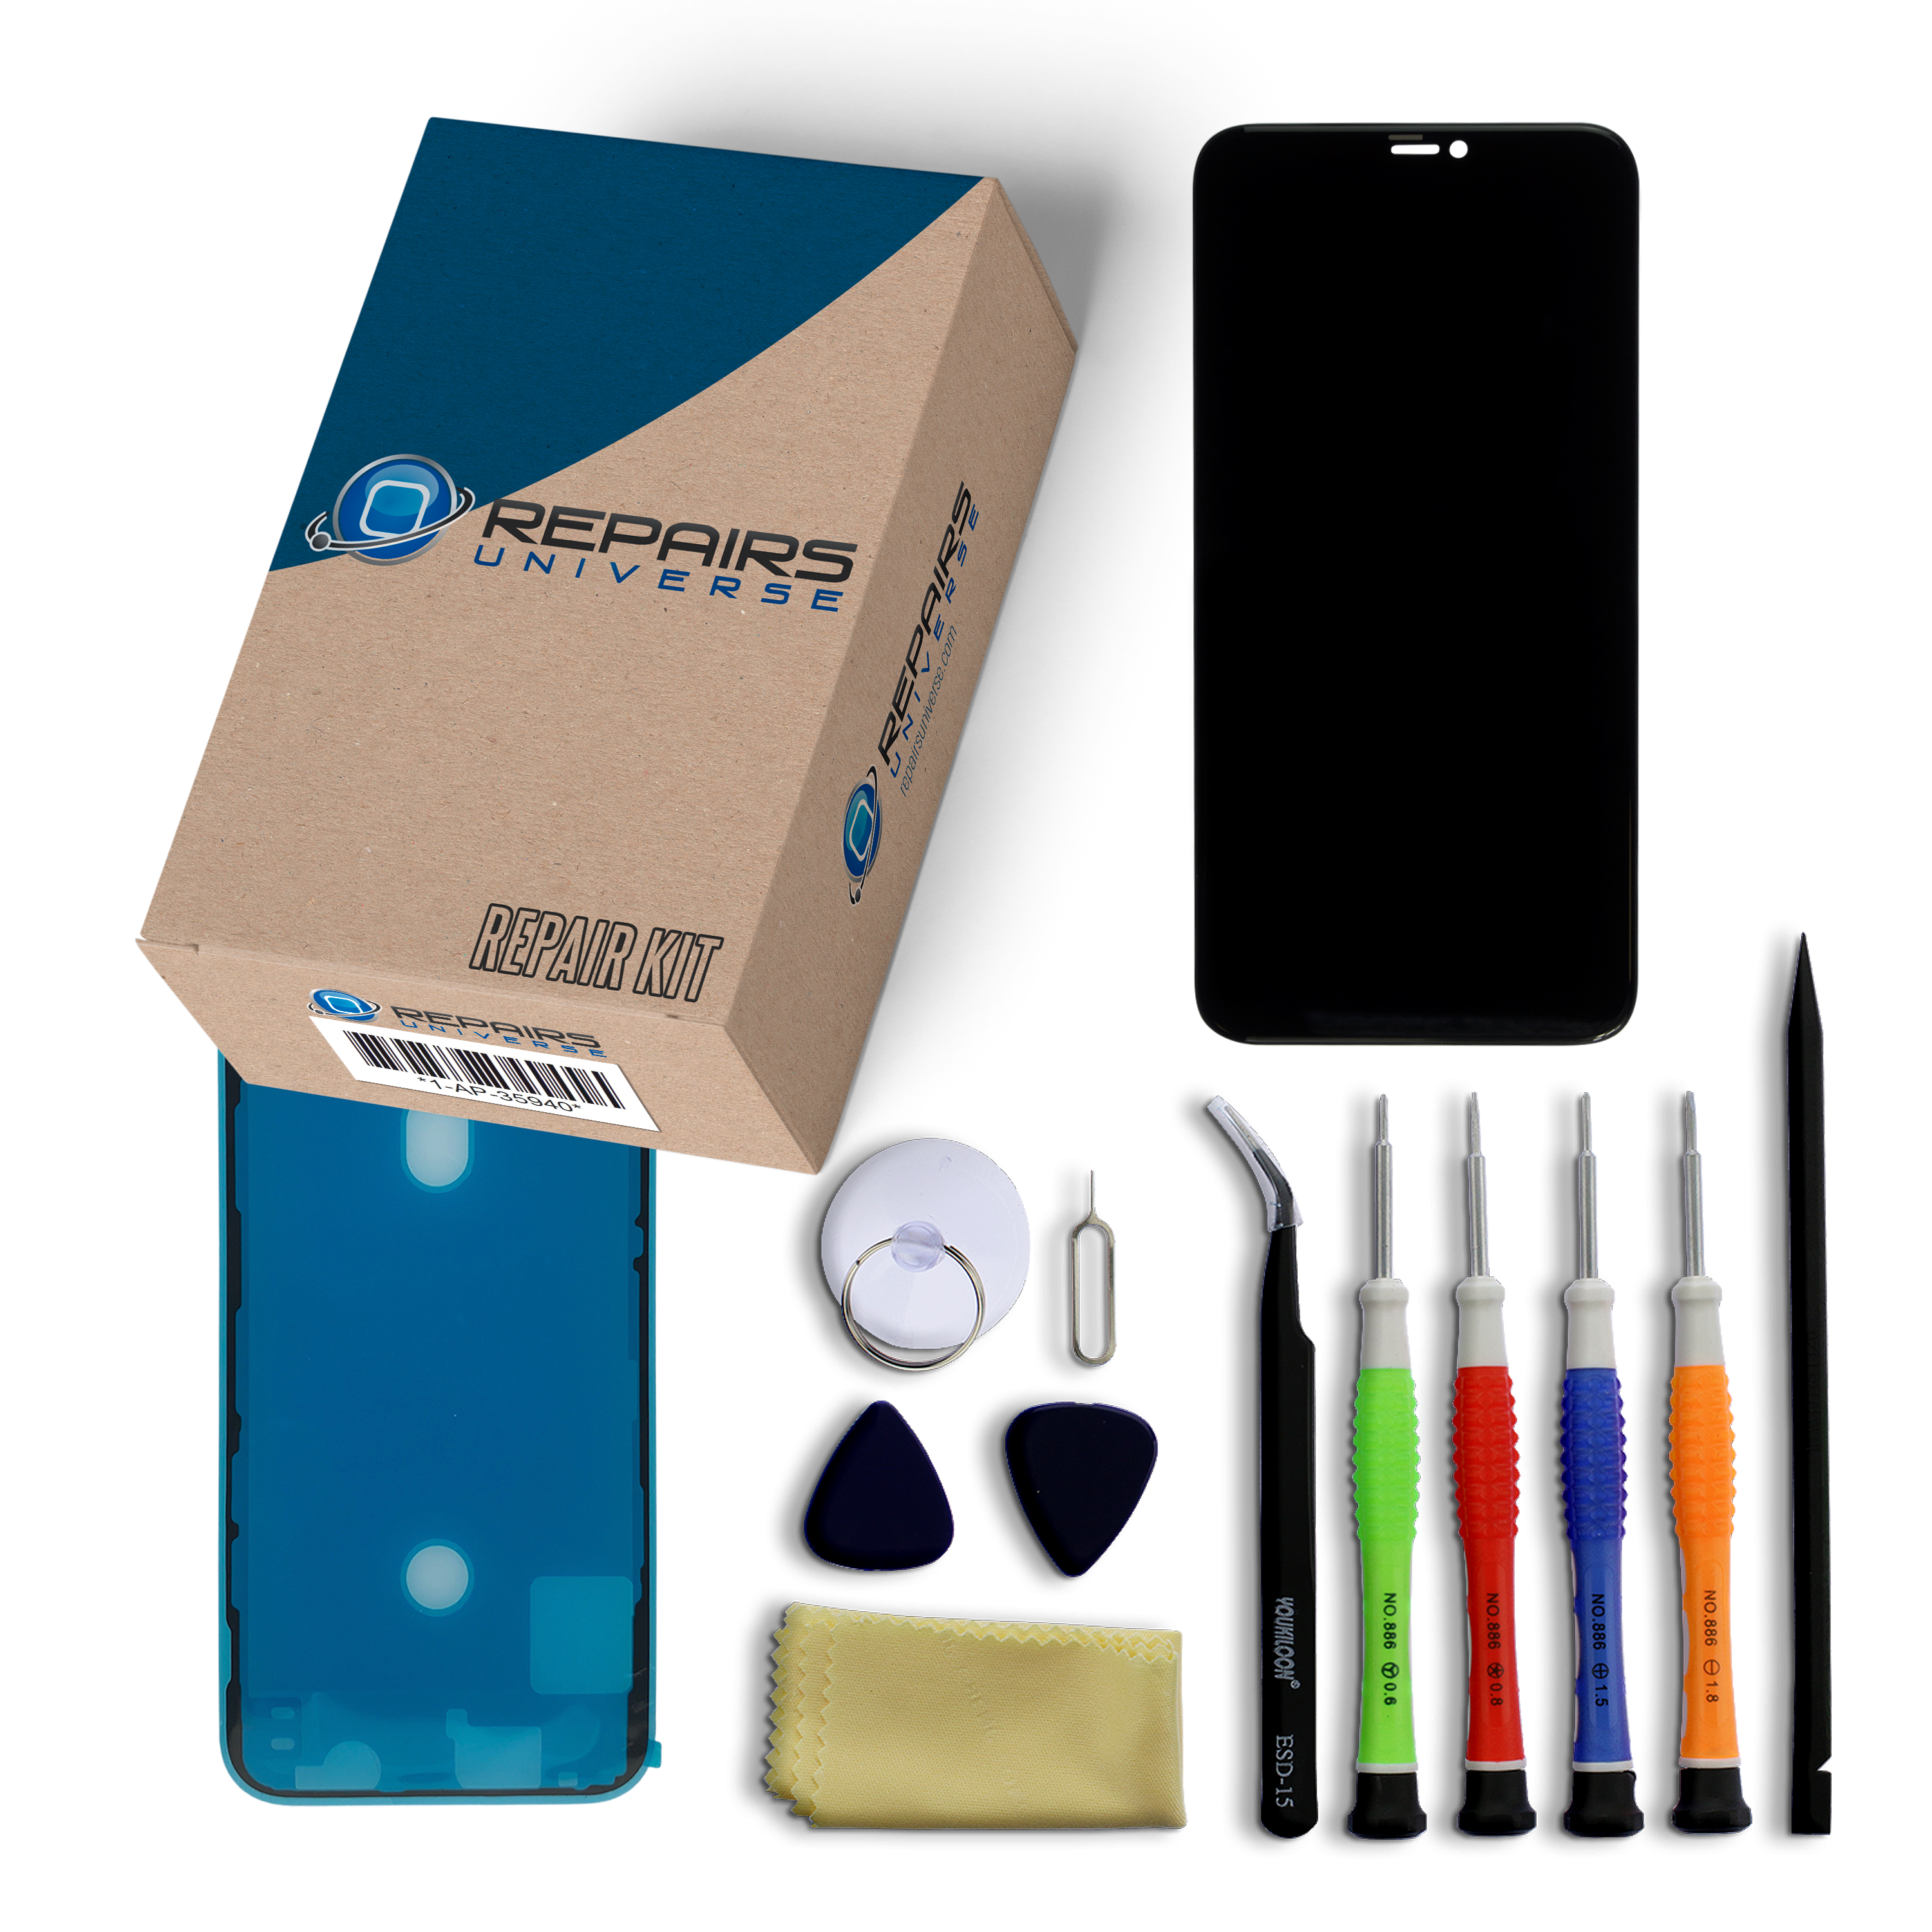 iPhone 11 Pro Max LCD Screen Replacement + Complete Repair Kit + Easy Video Guide